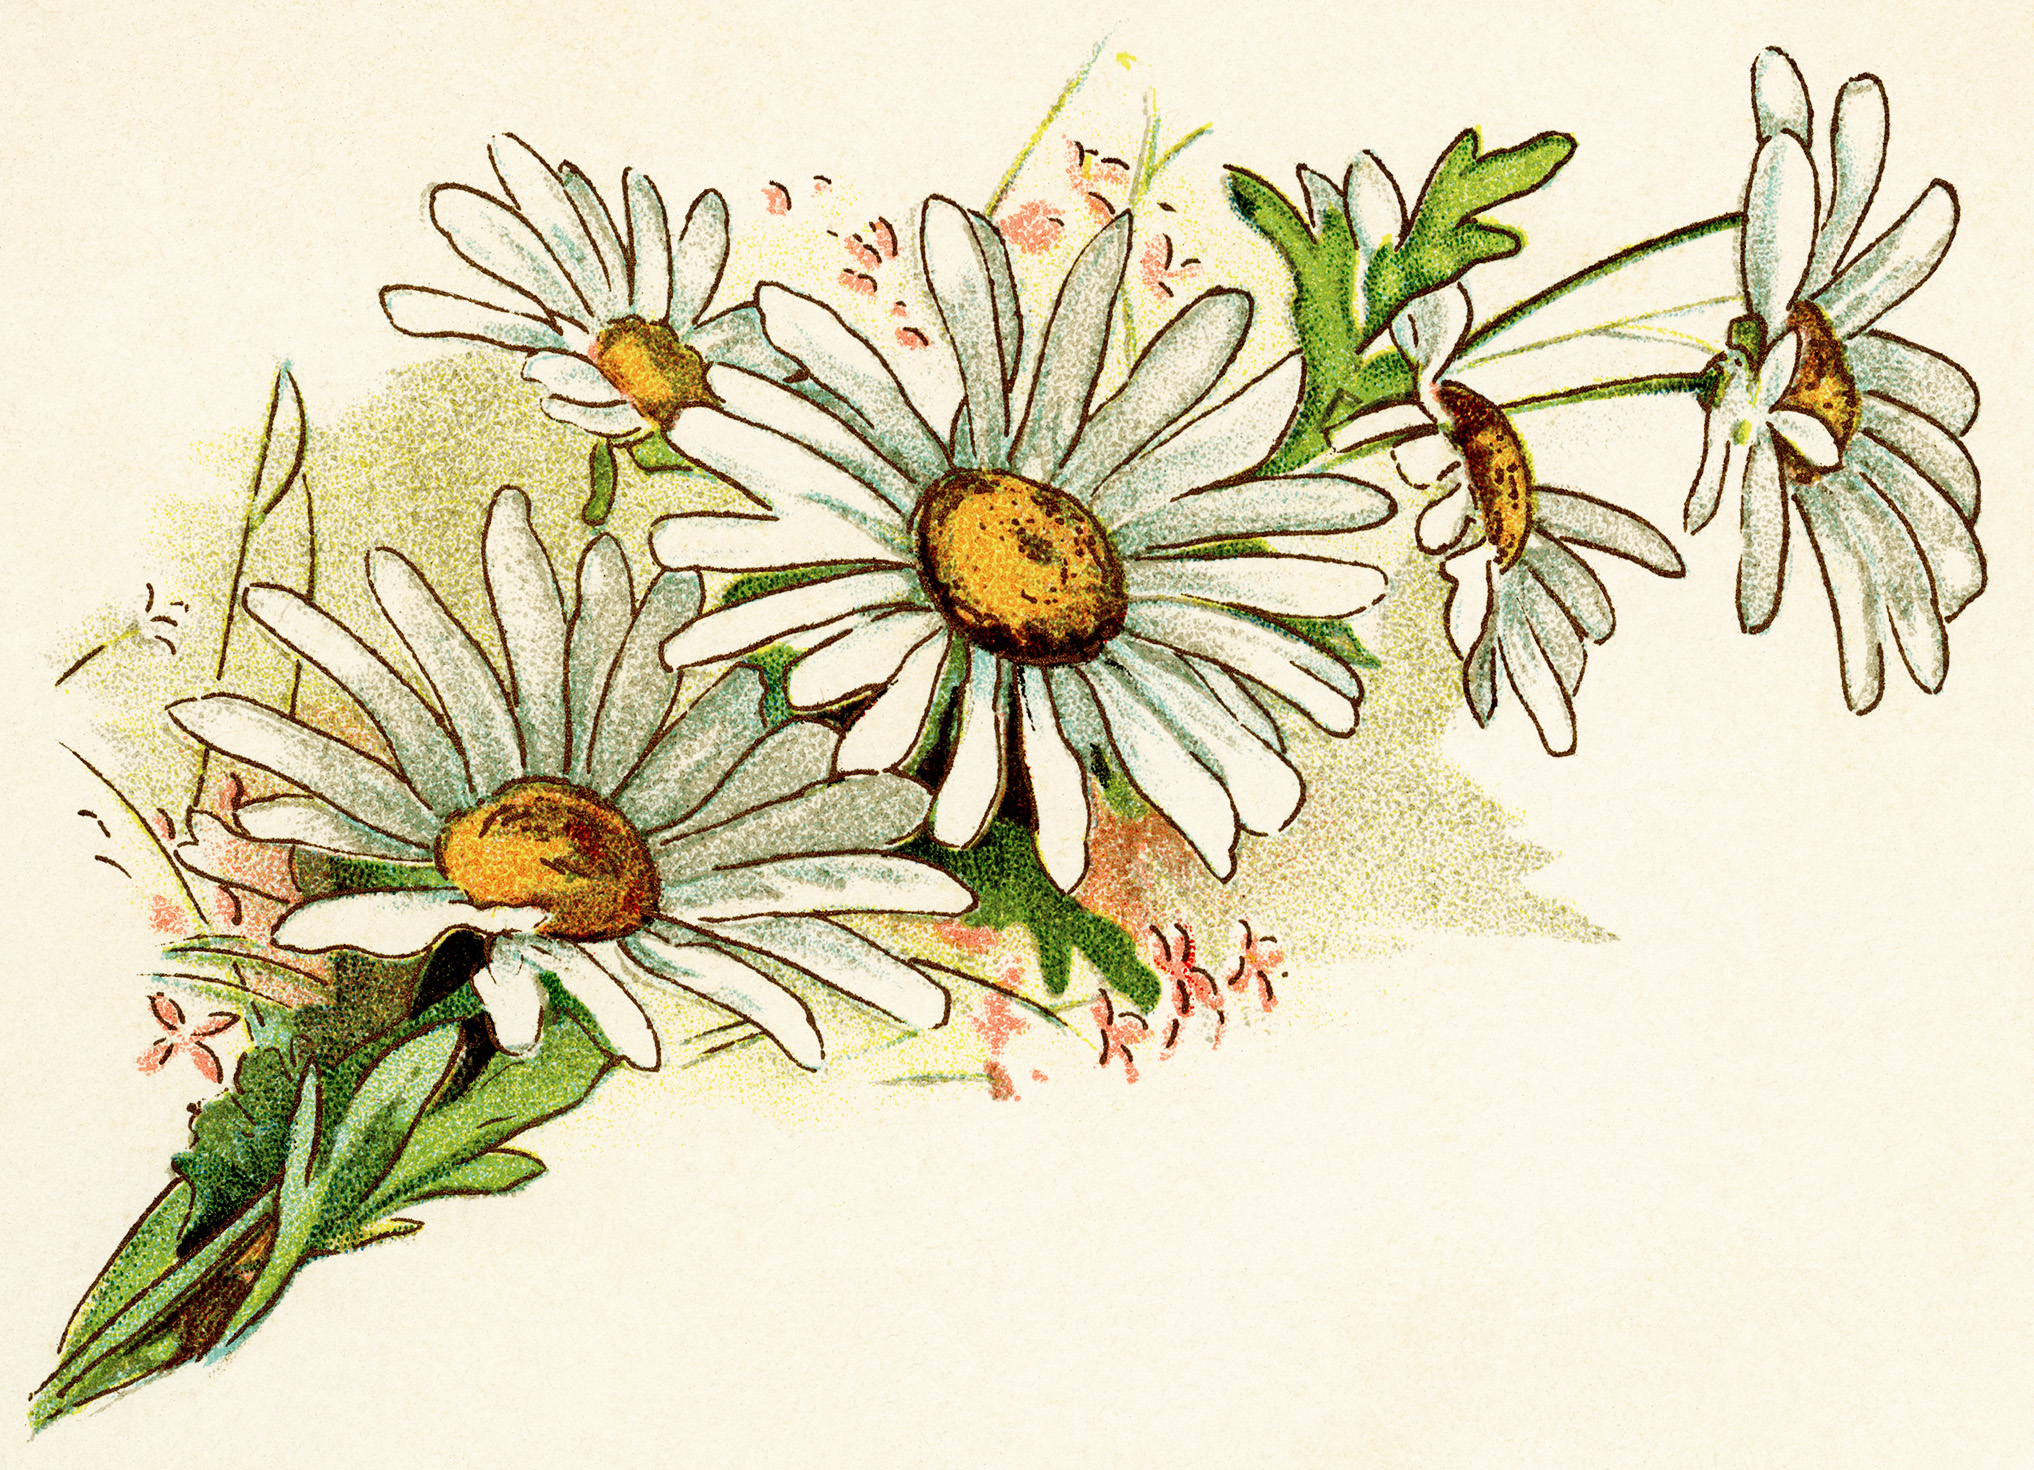 This Lovely Vintage Image Of A Cluster Of Daisies Is From A Book Of